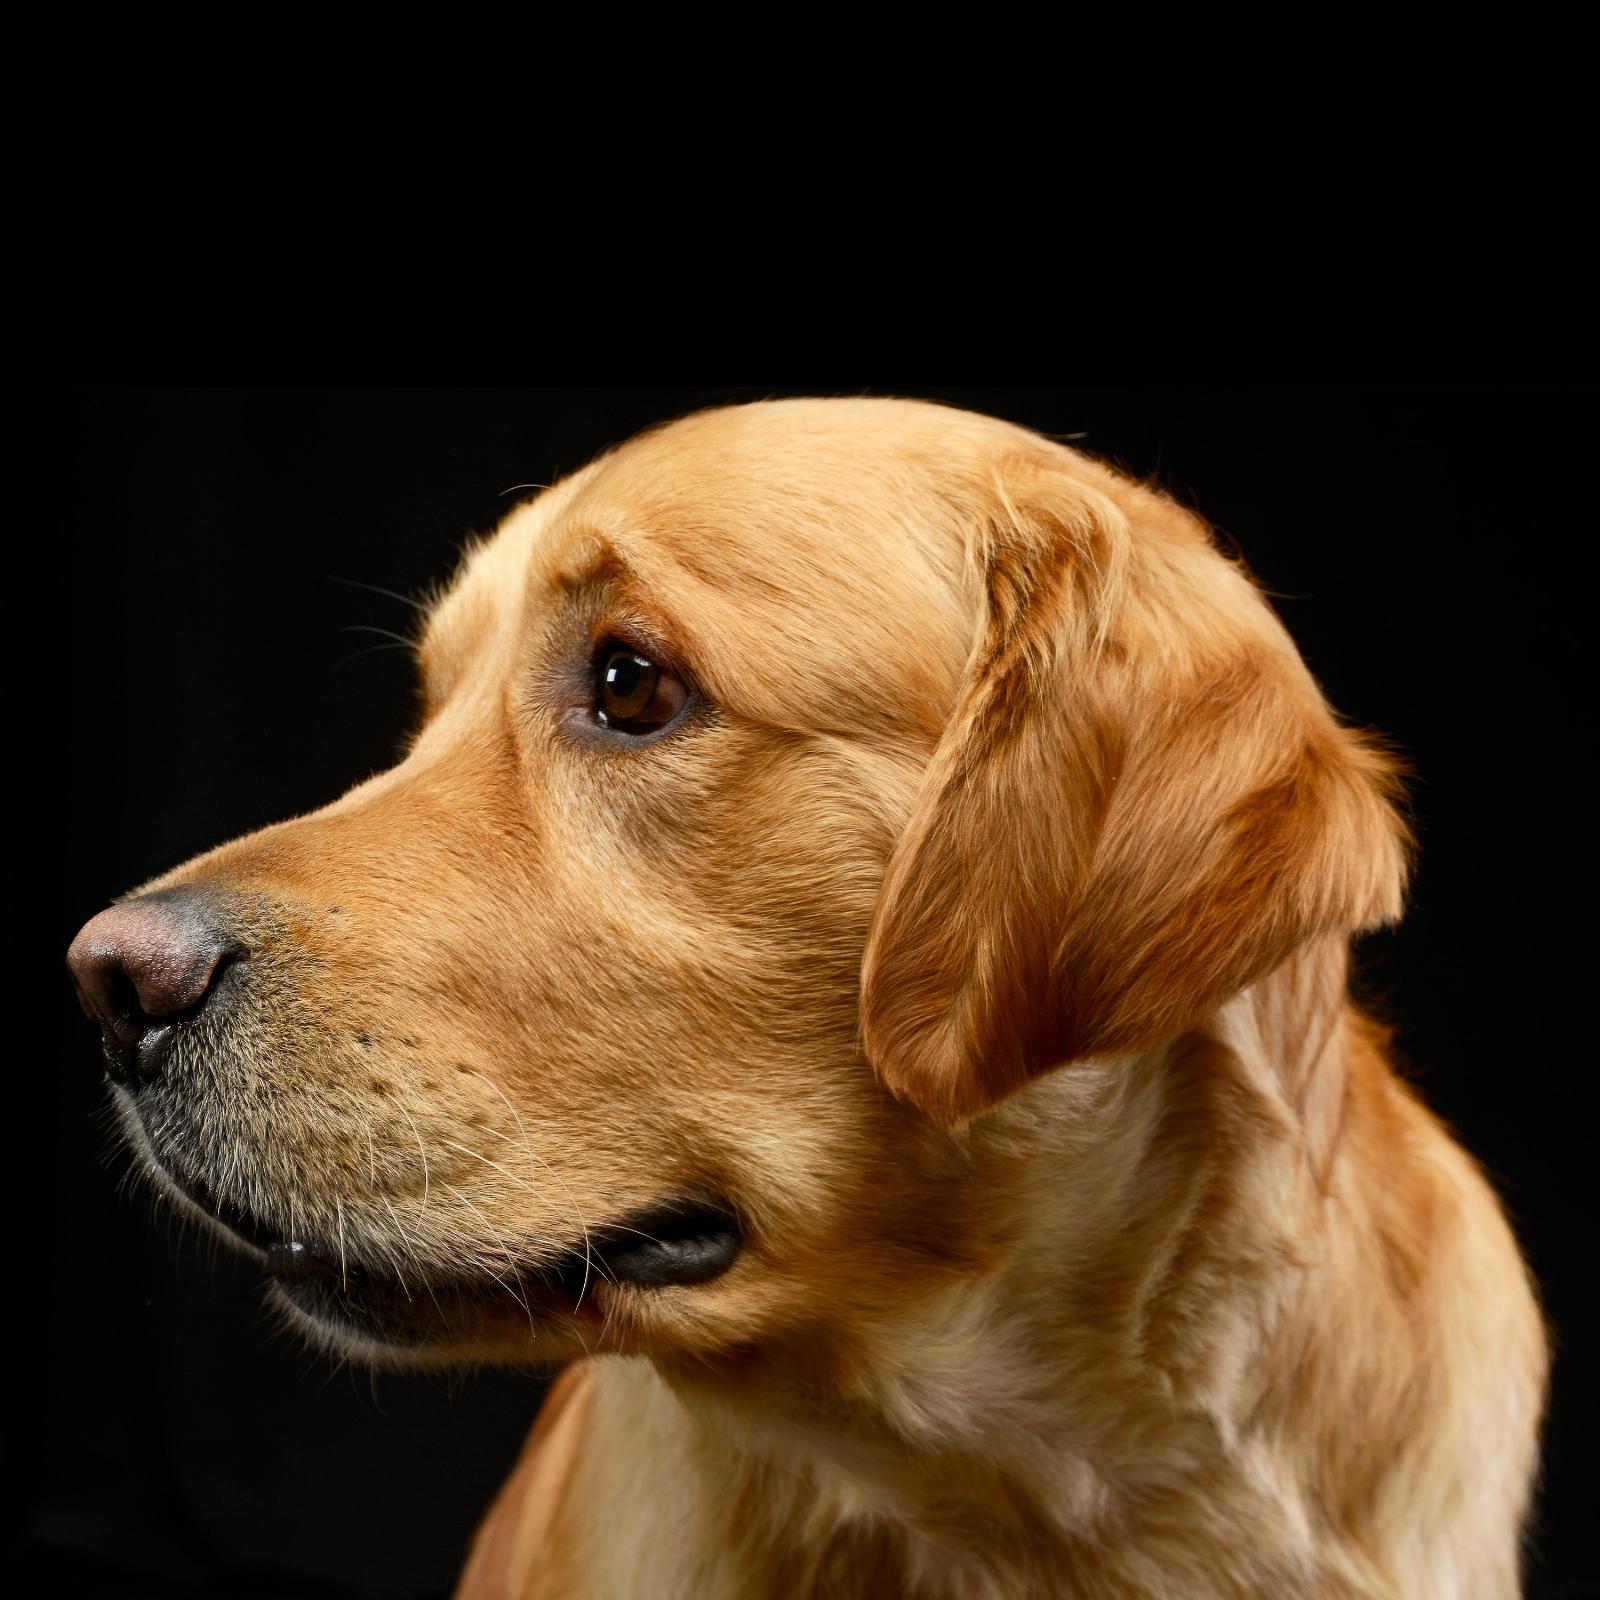 The Truth About Golden Retrievers Could Change How We Think About Dogs for Good